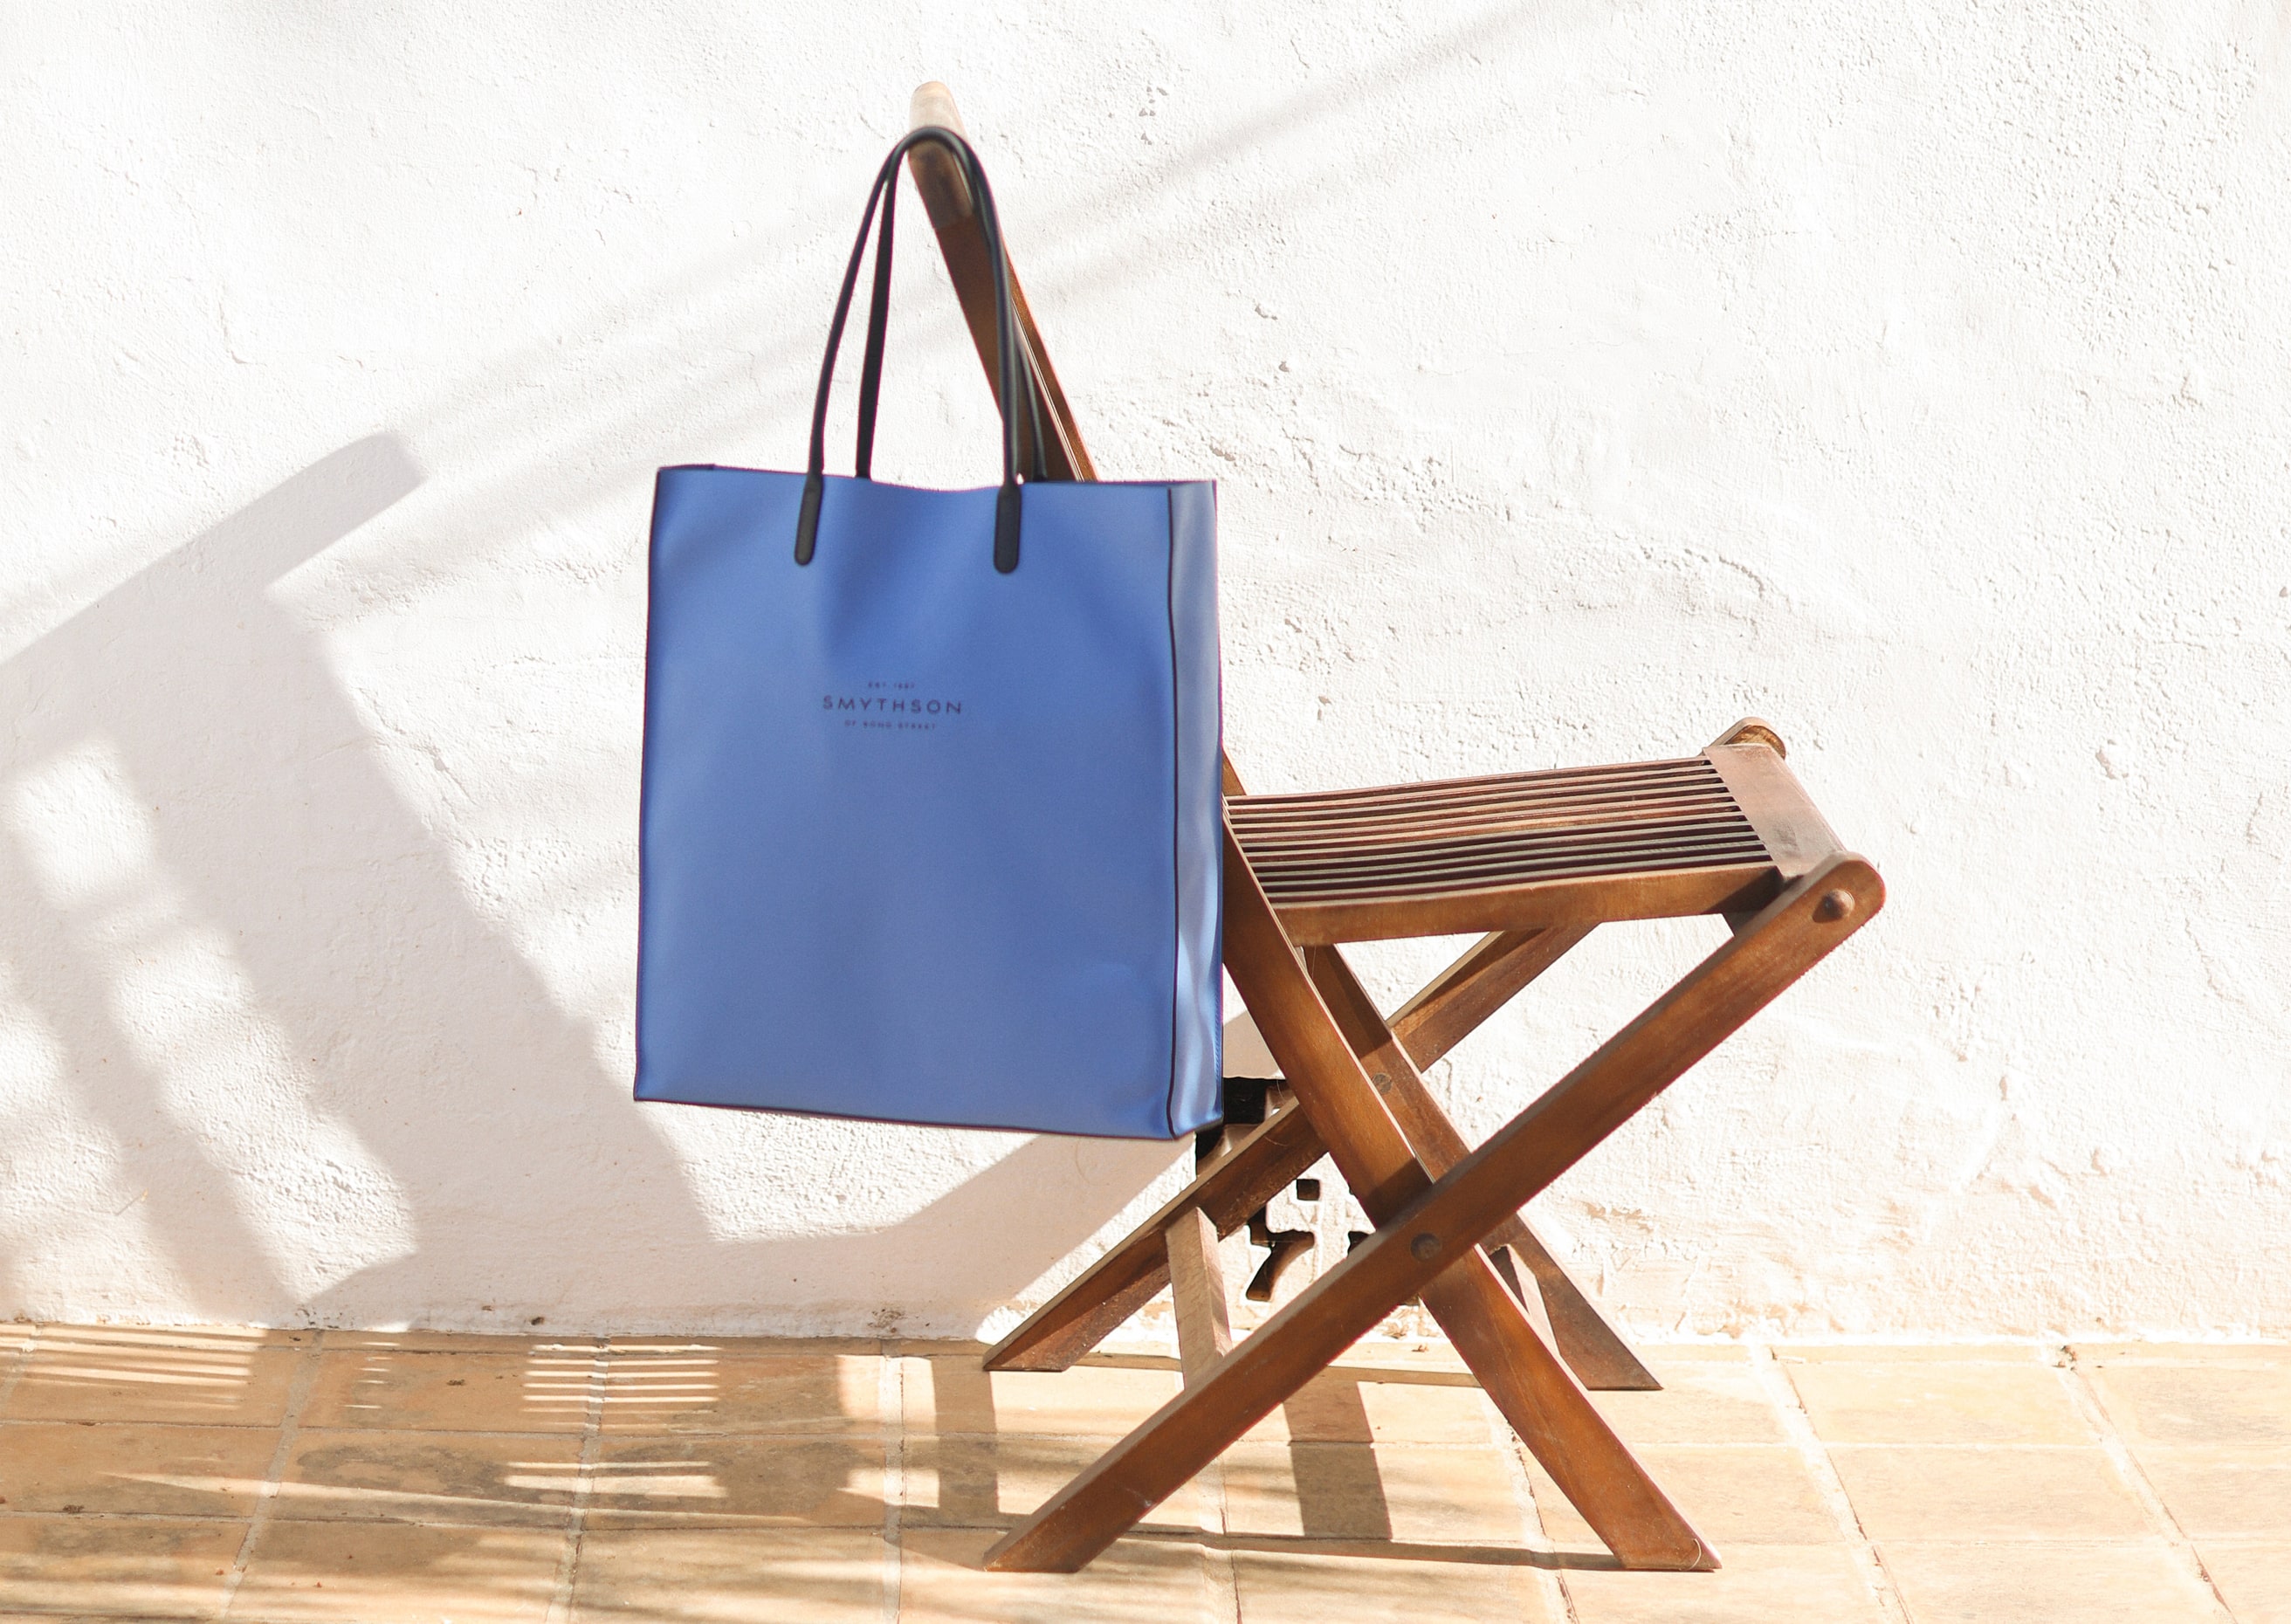 Meet the Kingly Tote